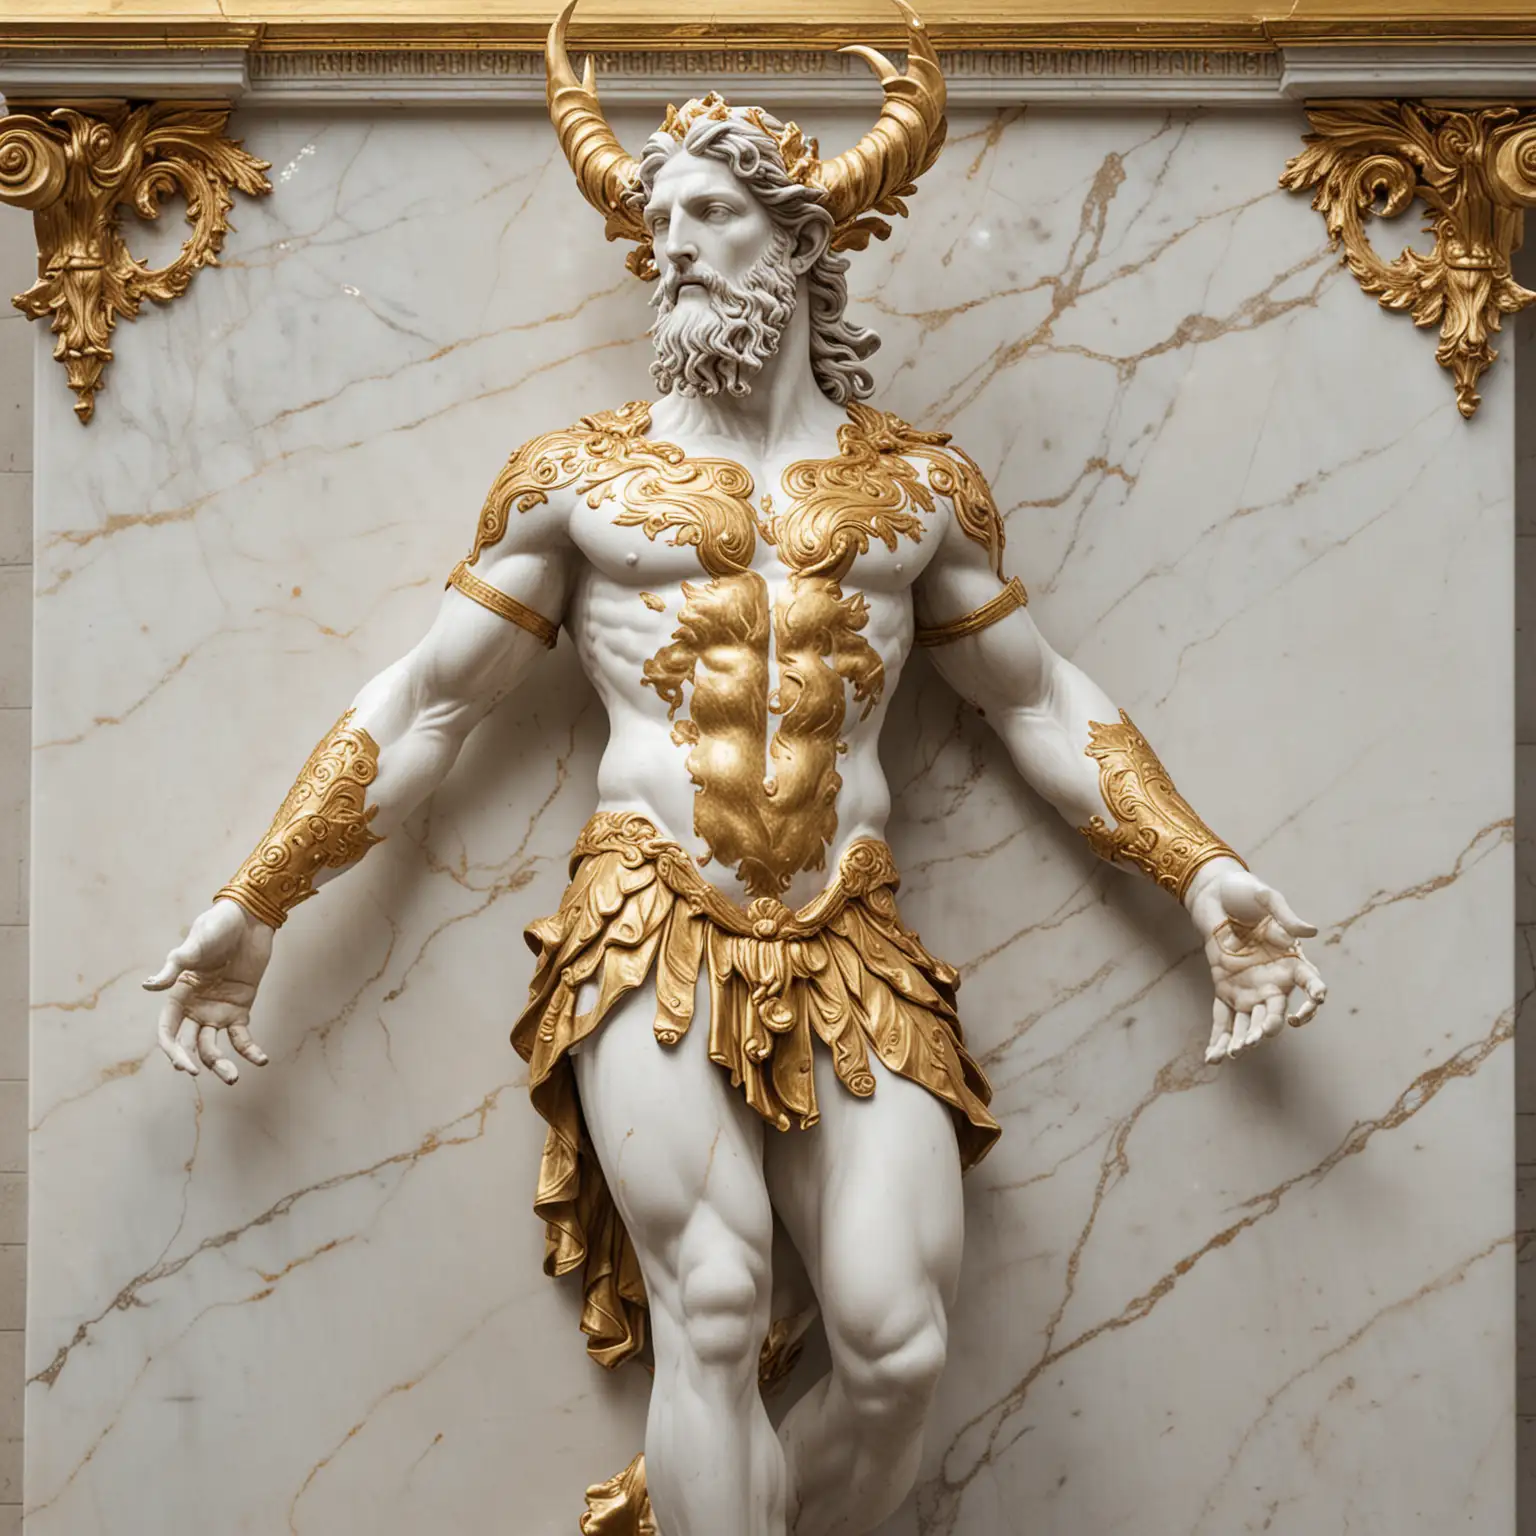 a marble statue cernunnos, with gold leaf patterns running across it, like a greek statue